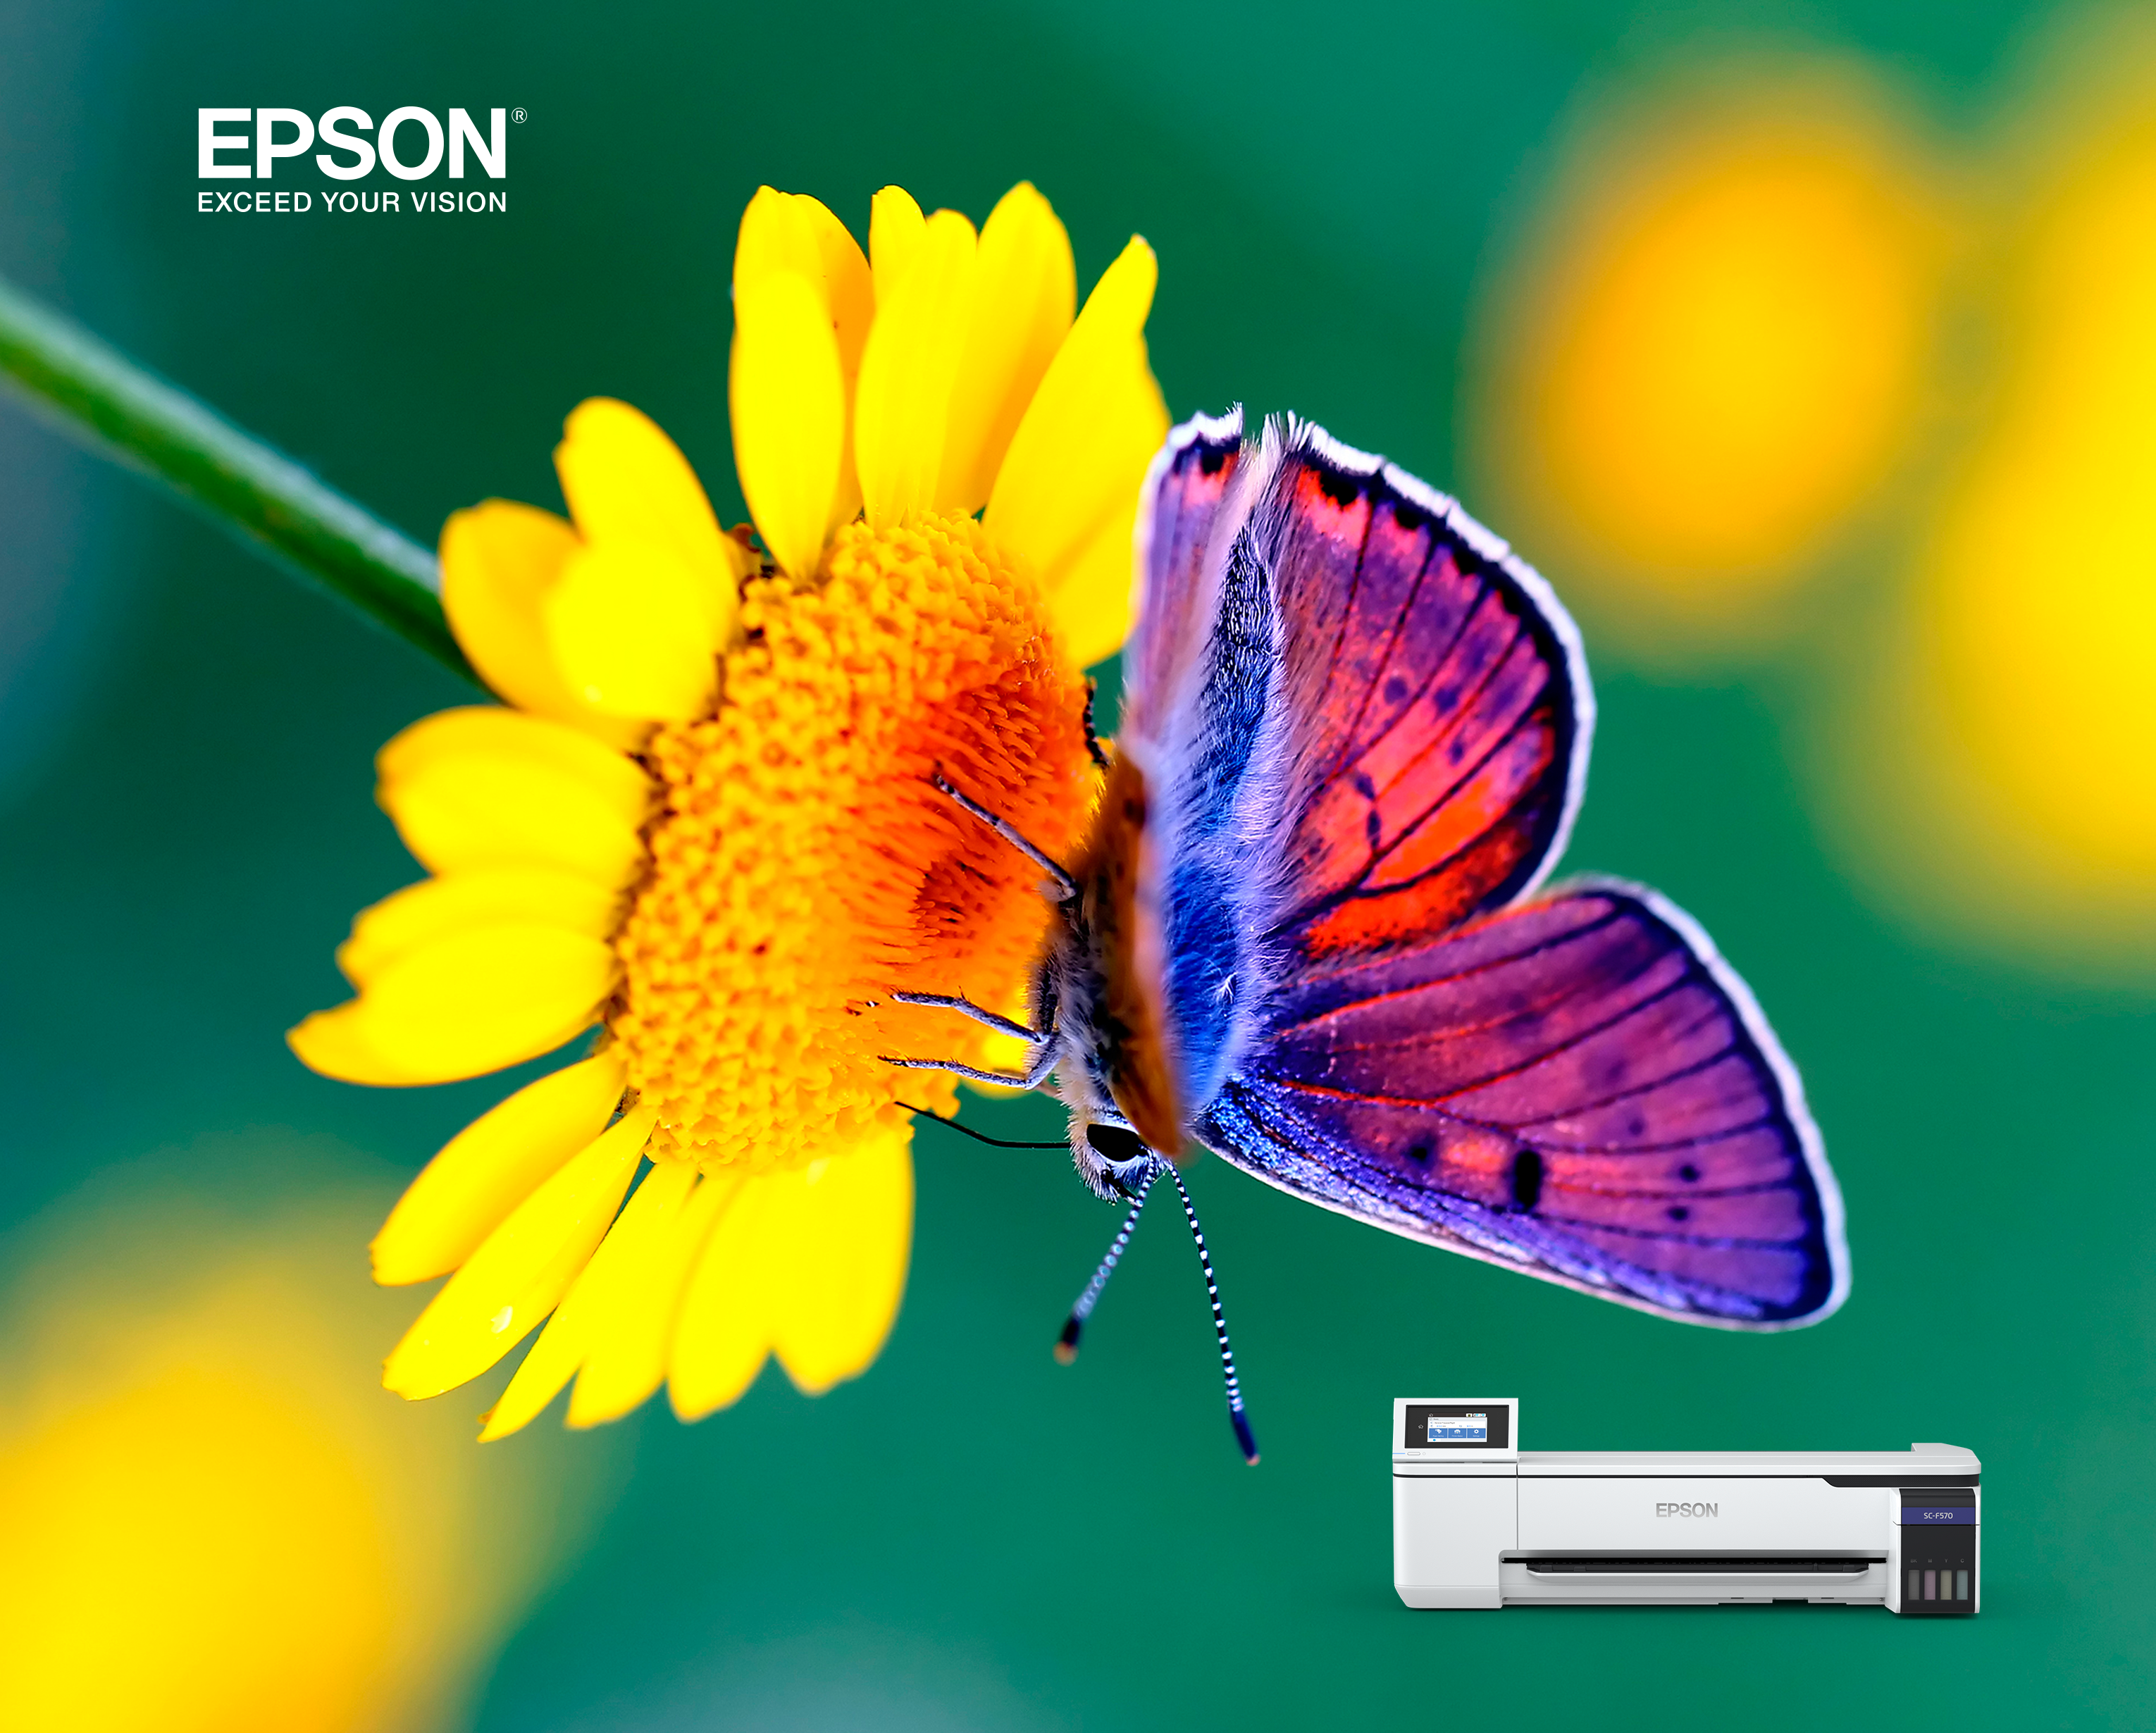 Epson Dye Sublimation SC-F570 Butterfly ChromaLuxe - A detailed butterfly image on ChromaLuxe metal print created with the Epson F570 printer